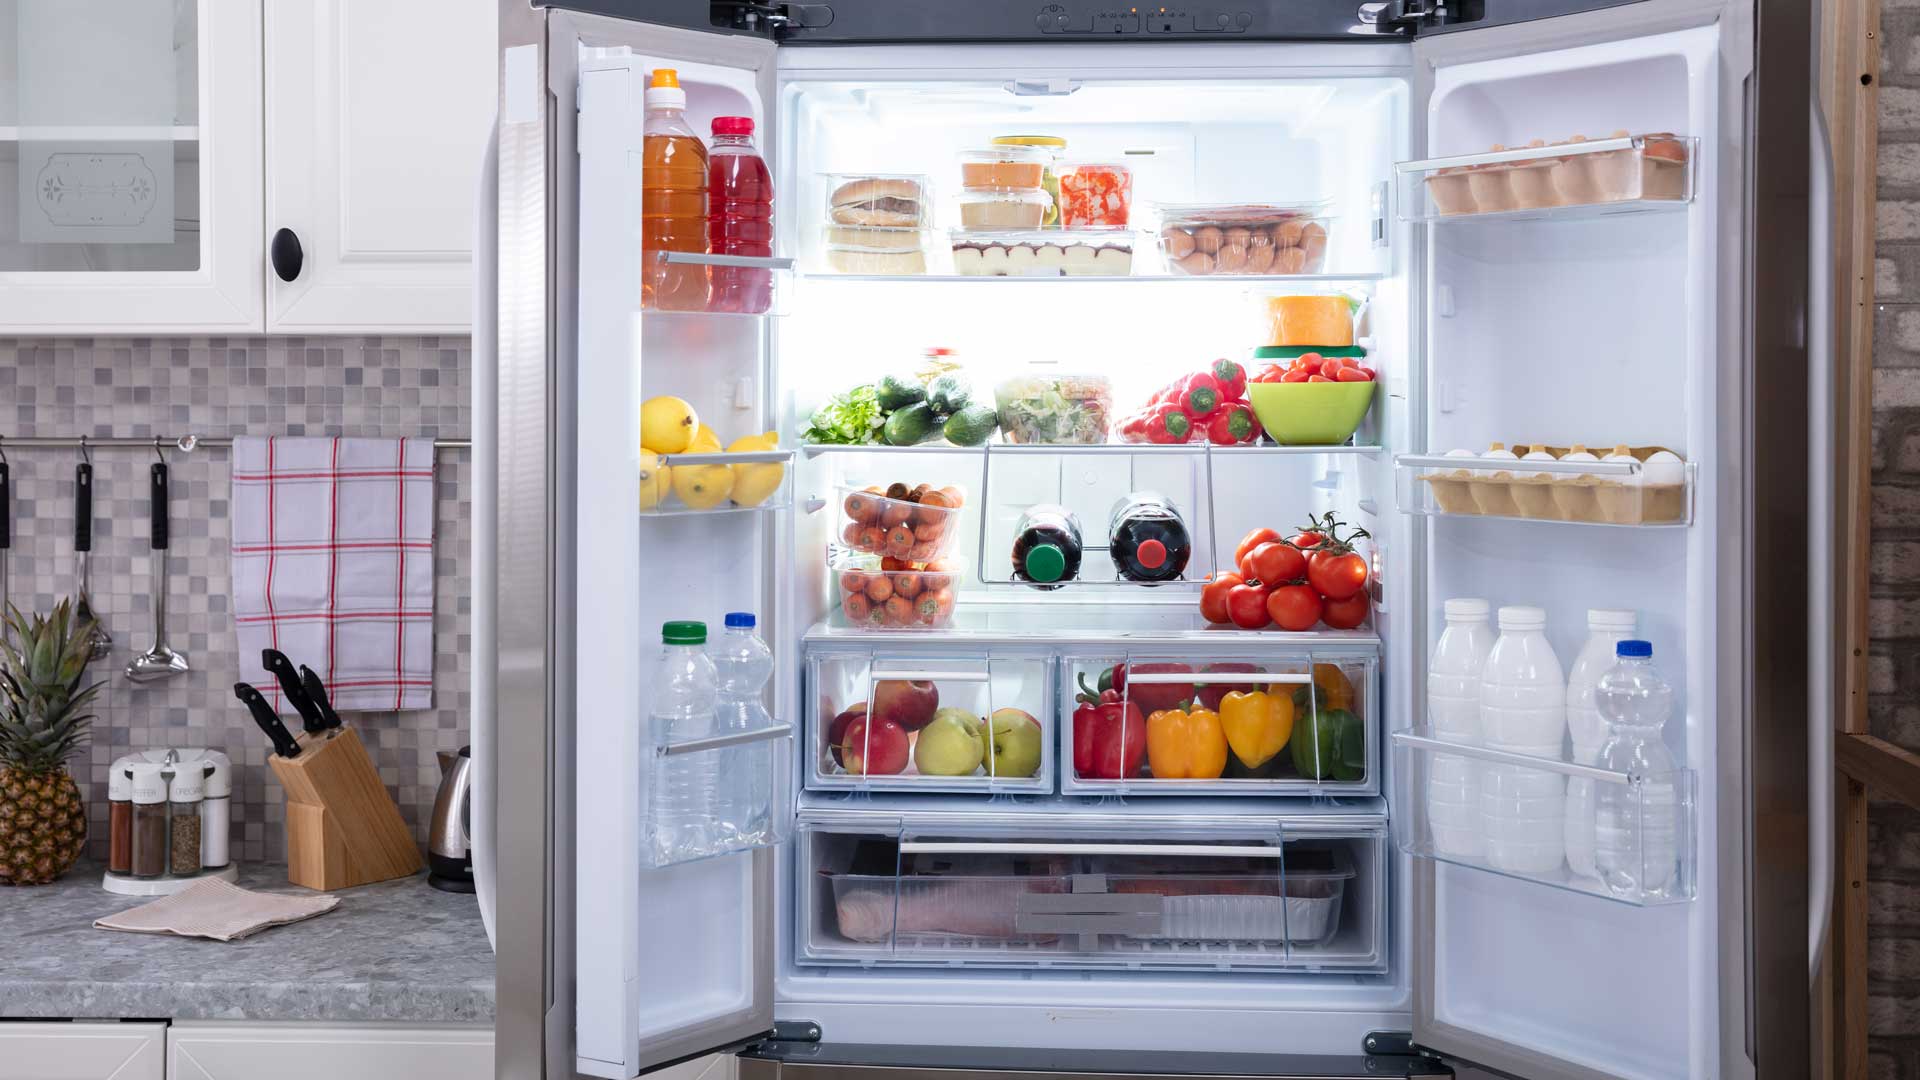 Fully-stocked refrigerator with doors opened